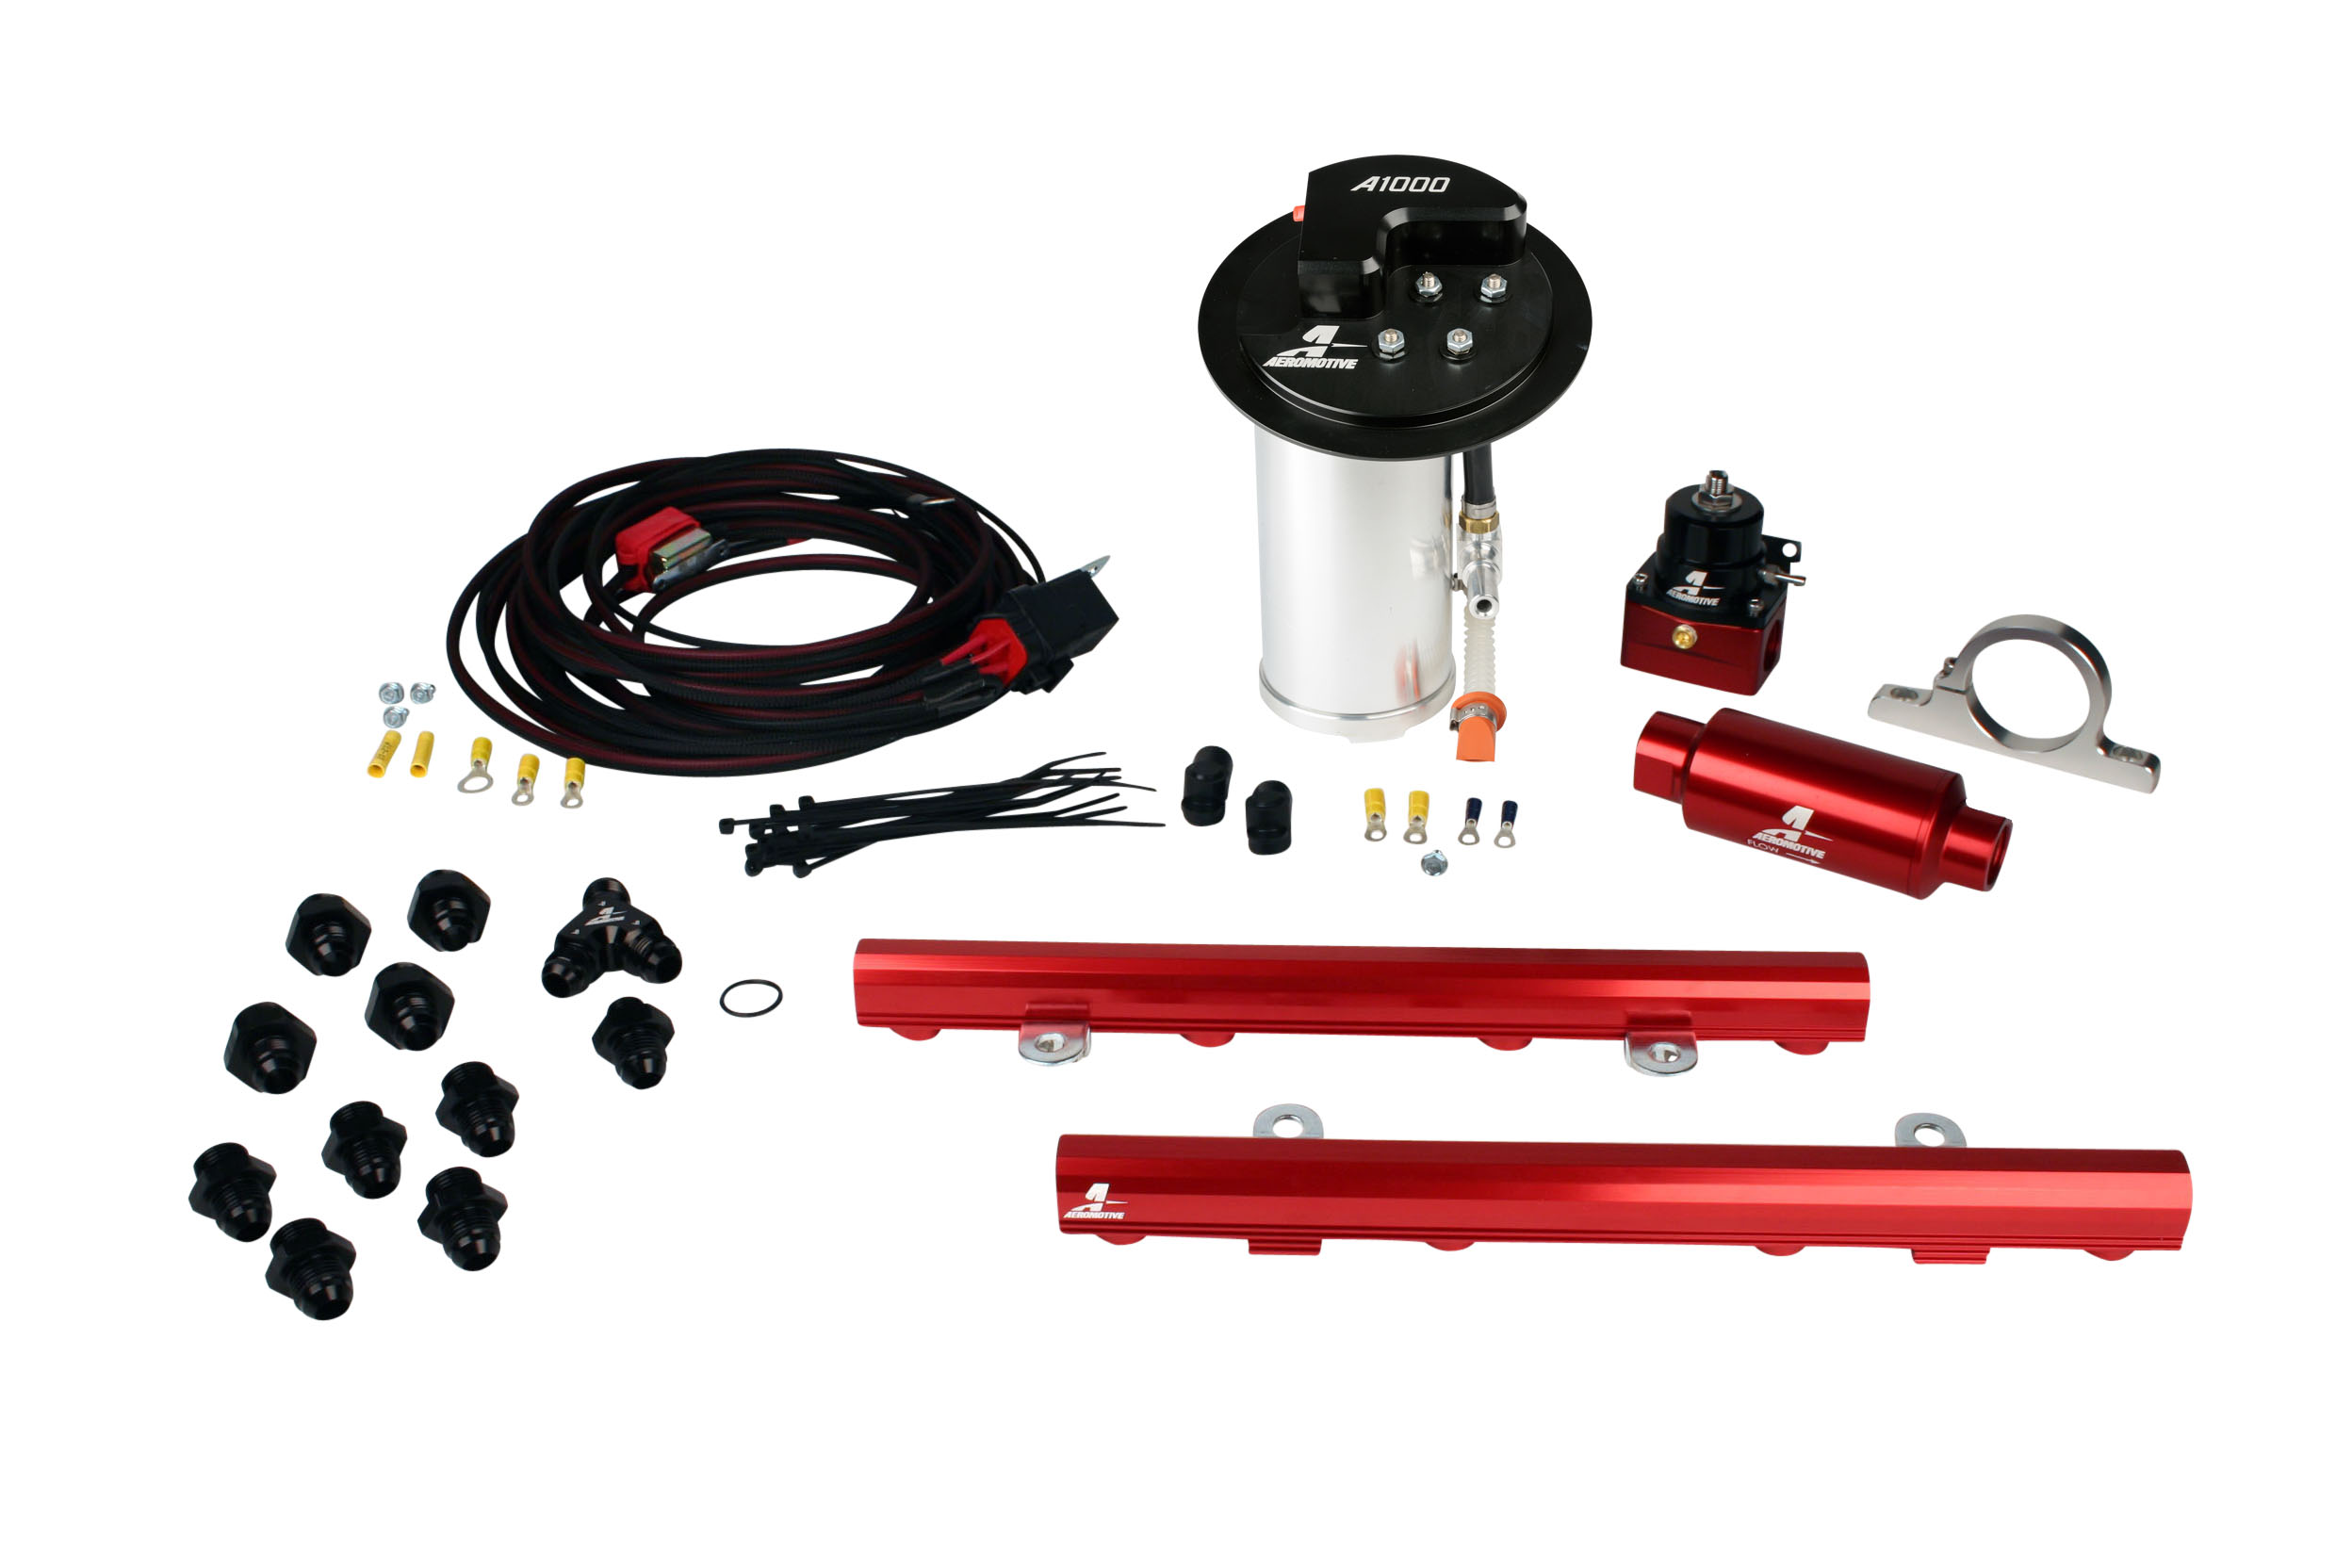 2010-2017 Ford Mustang GT Aeromotive Stealth A1000 Race Fuel System w/5.0L Coyote 4 Valve Fuel Rail